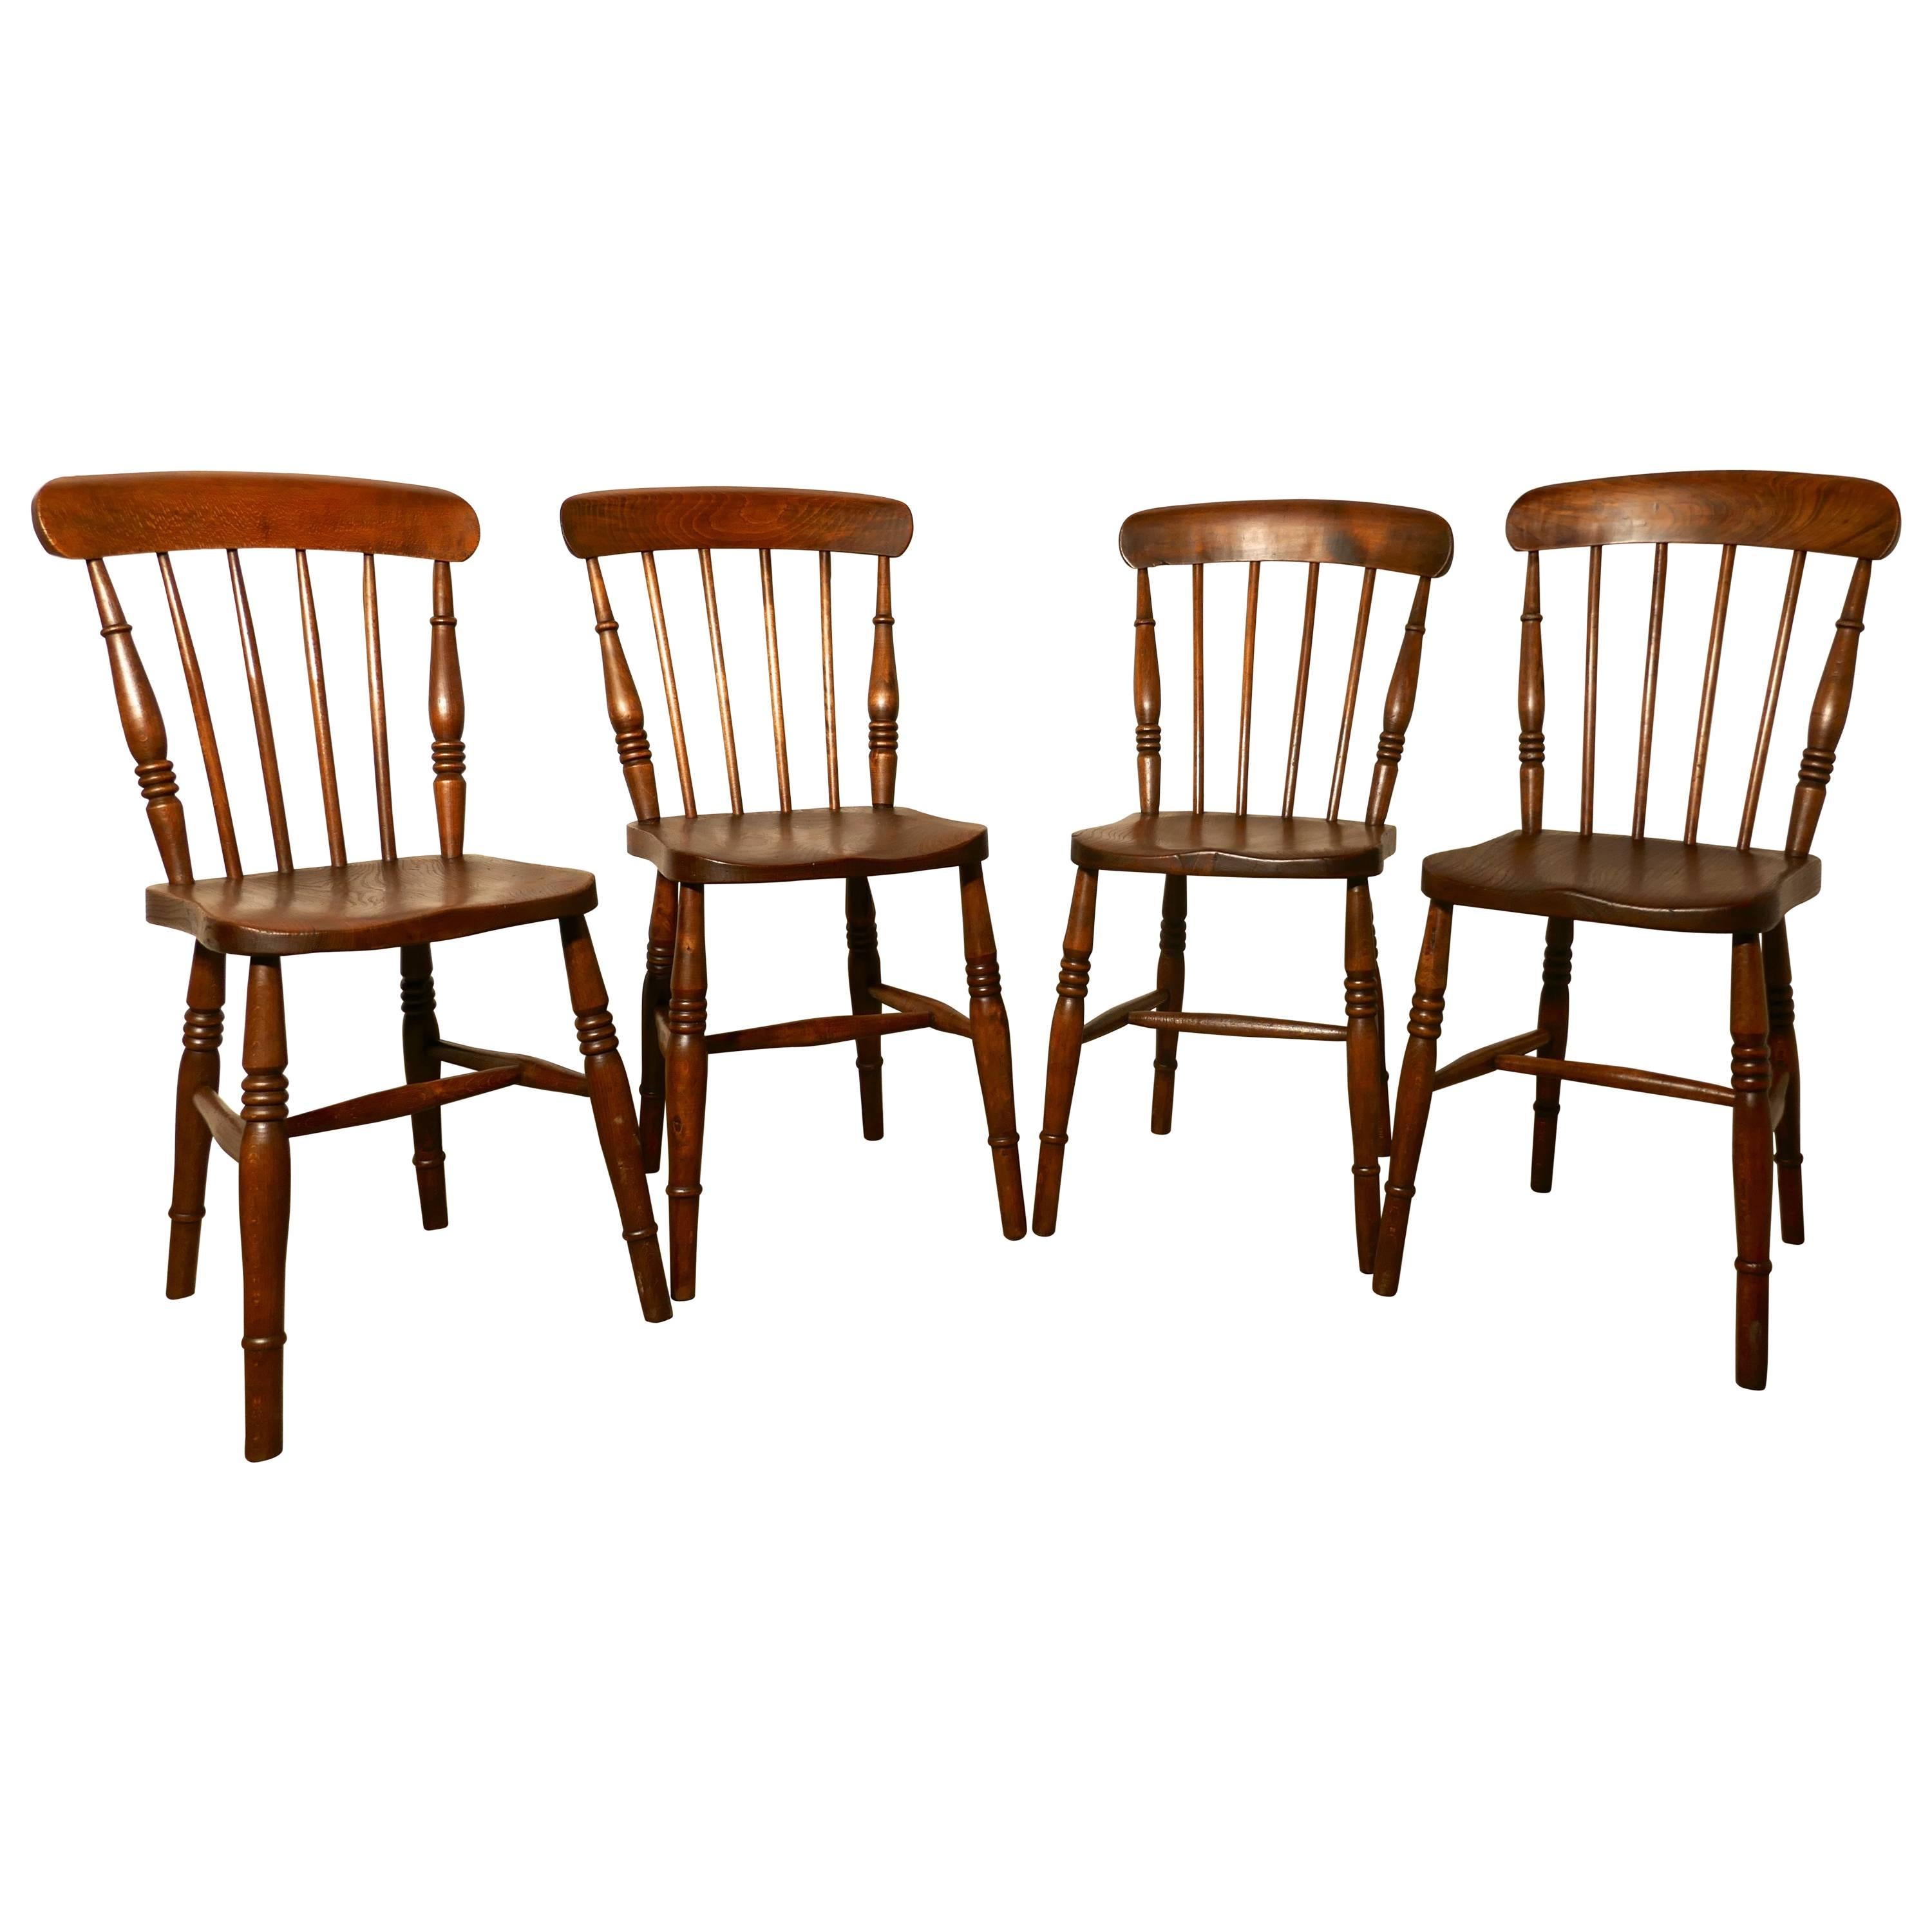 Set of Four Victorian Elm Seated Stick Back Windsor Kitchen Dining Chairs